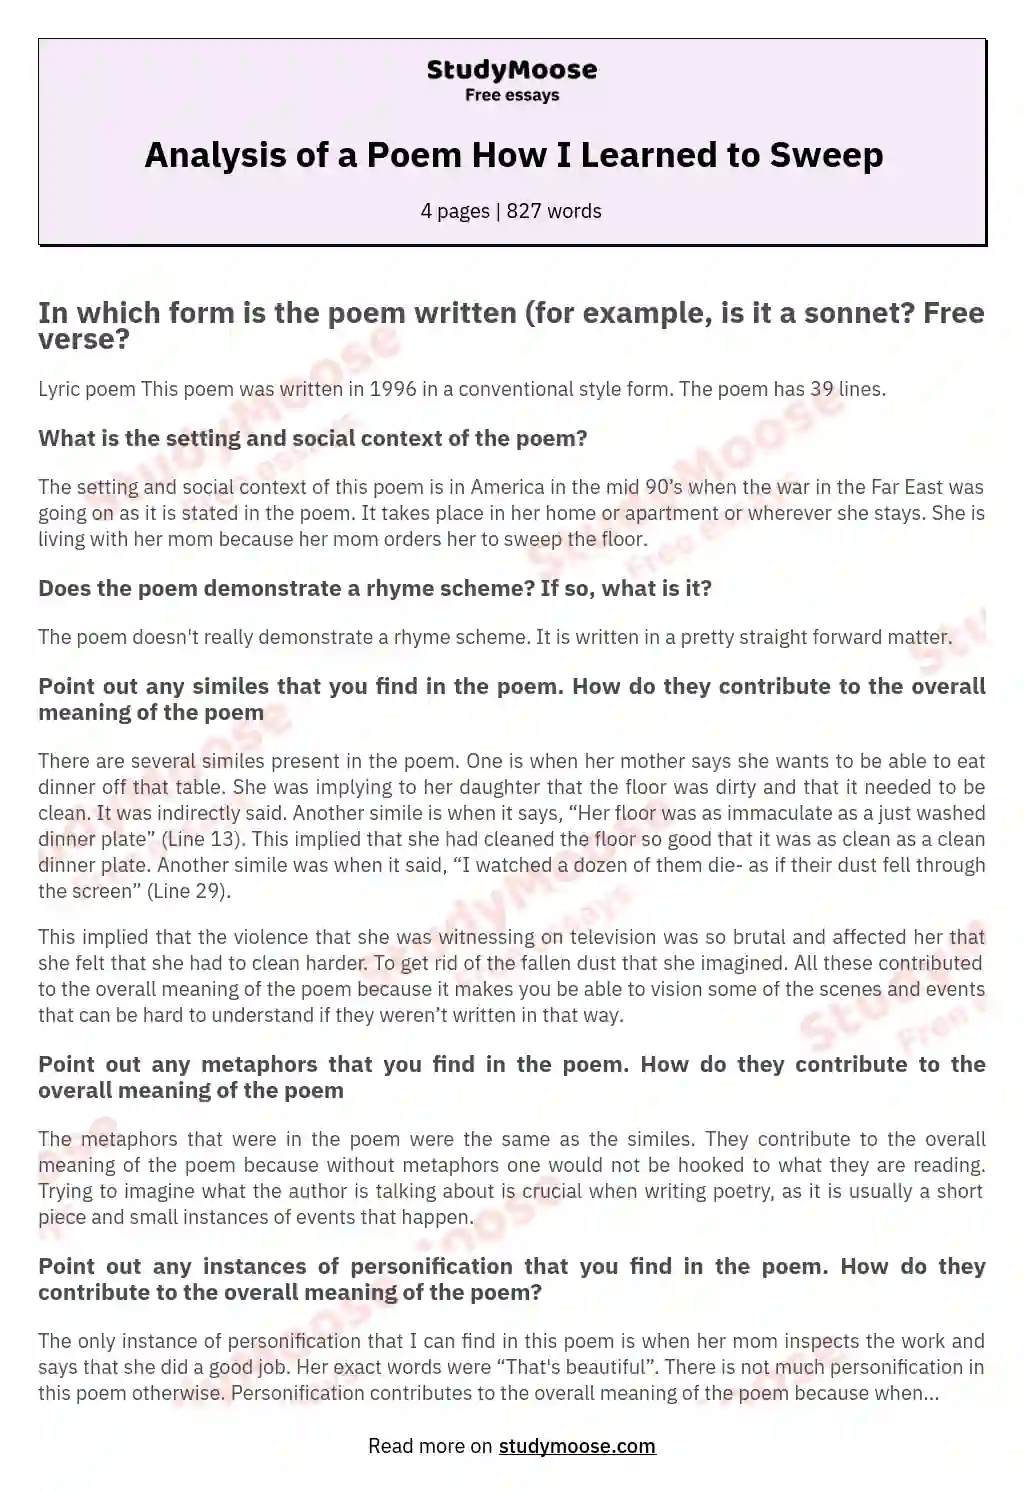 Analysis of a Poem How I Learned to Sweep essay